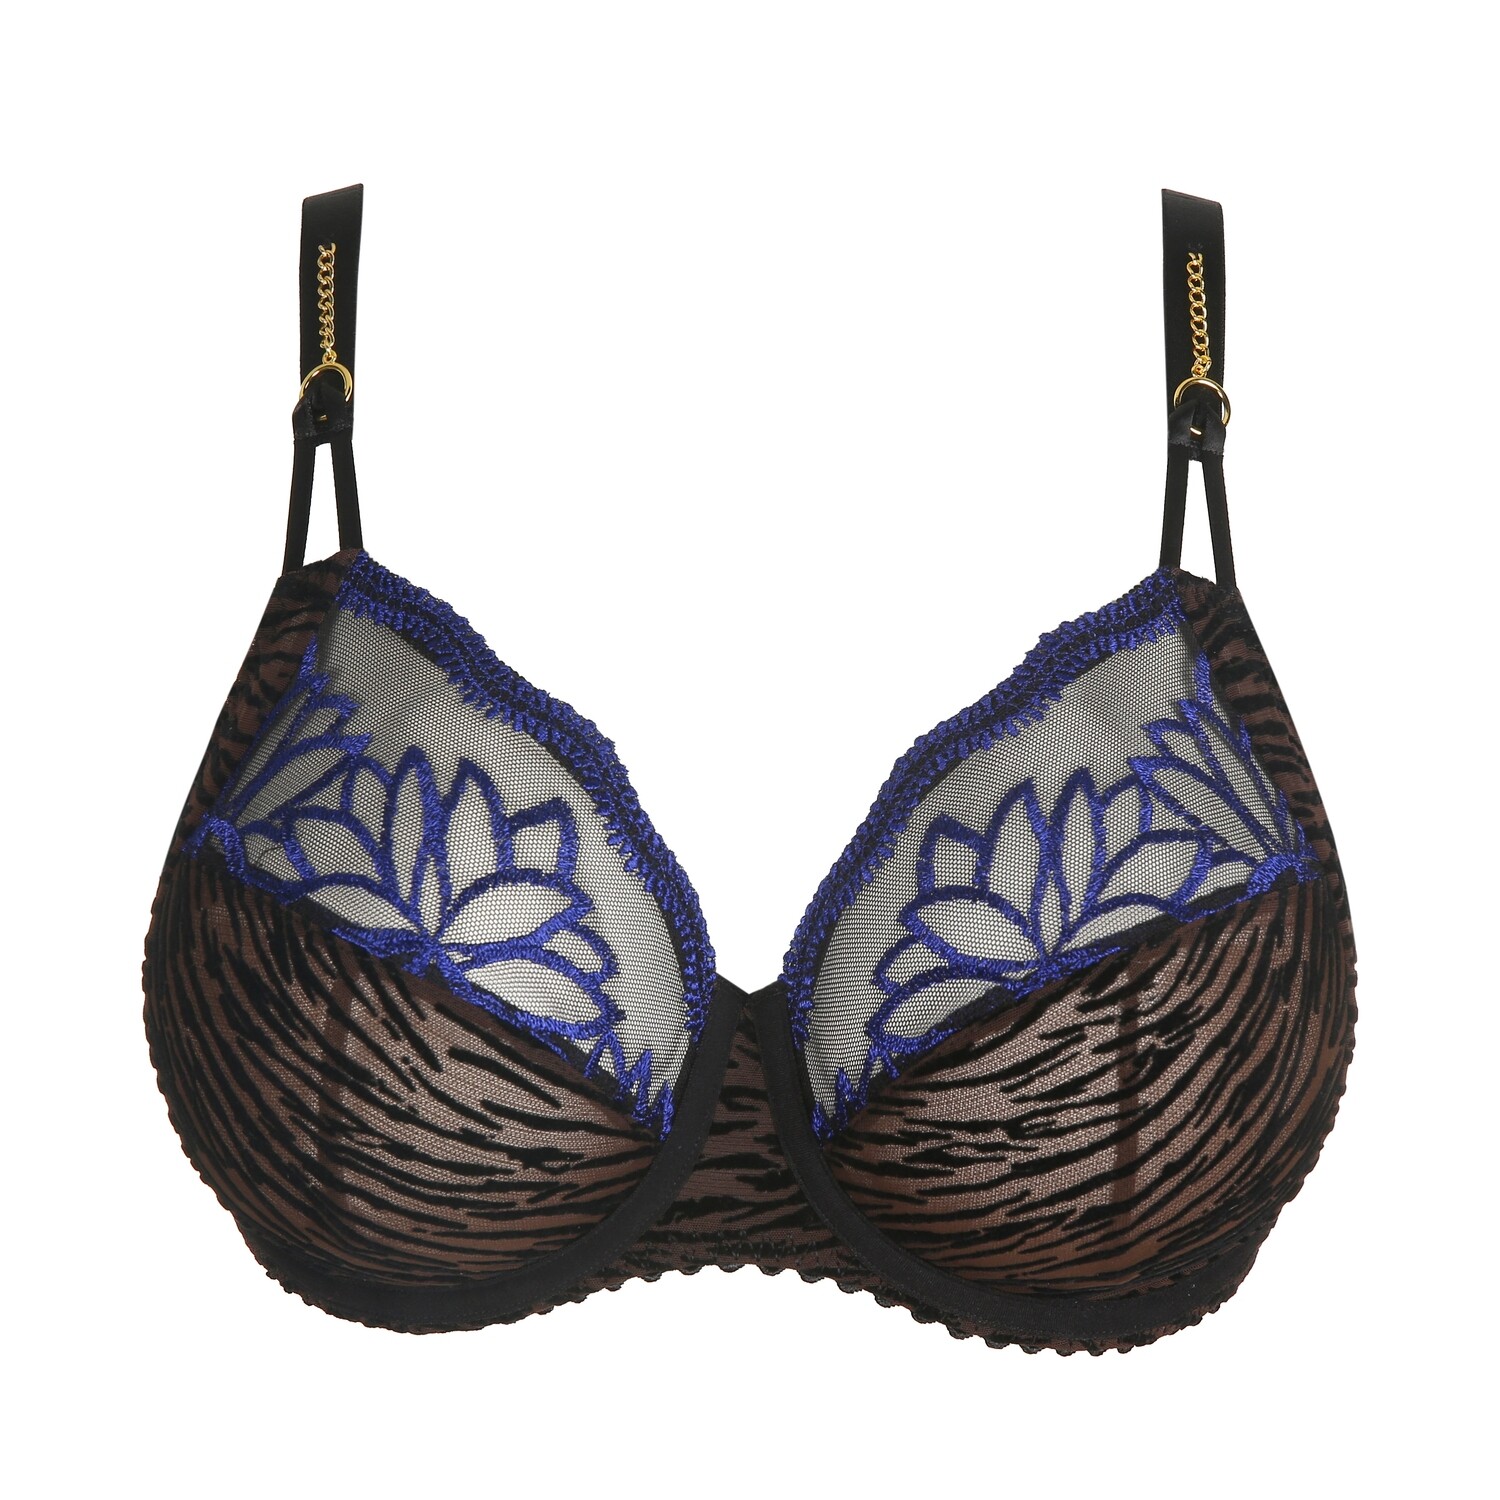 PRIMA DONNA CHEYNEY Sultry Black
volle cup bh